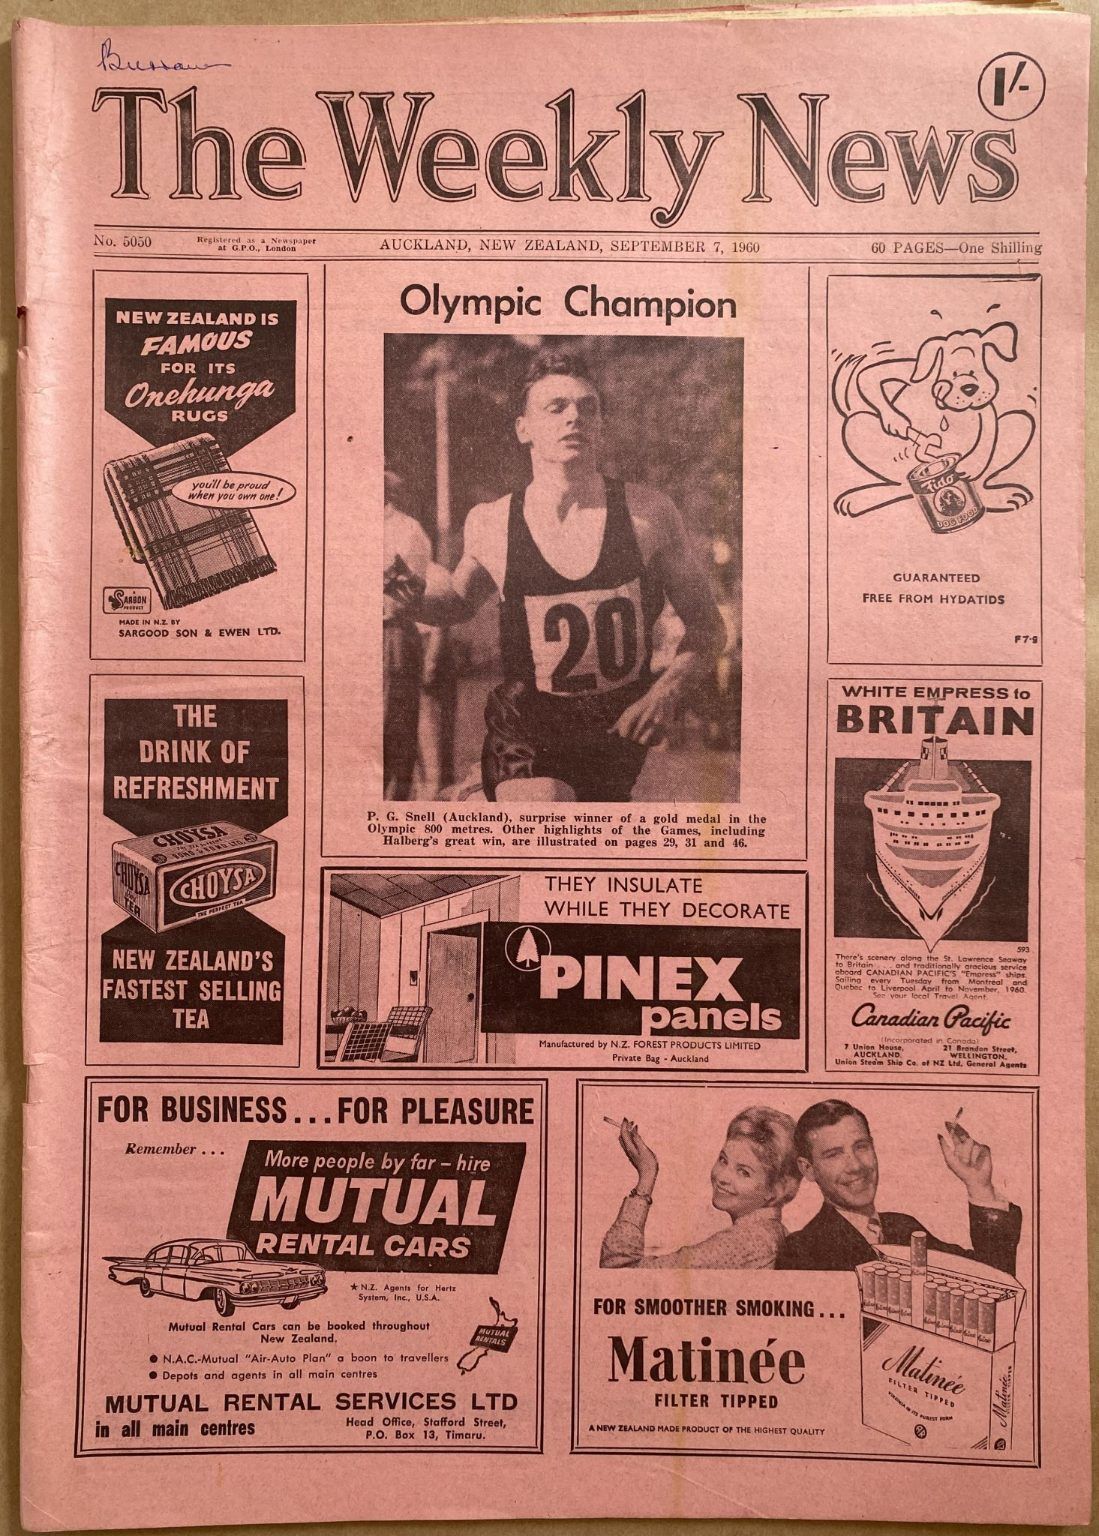 OLD NEWSPAPER: The Weekly News, No. 5050, 7 September 1960